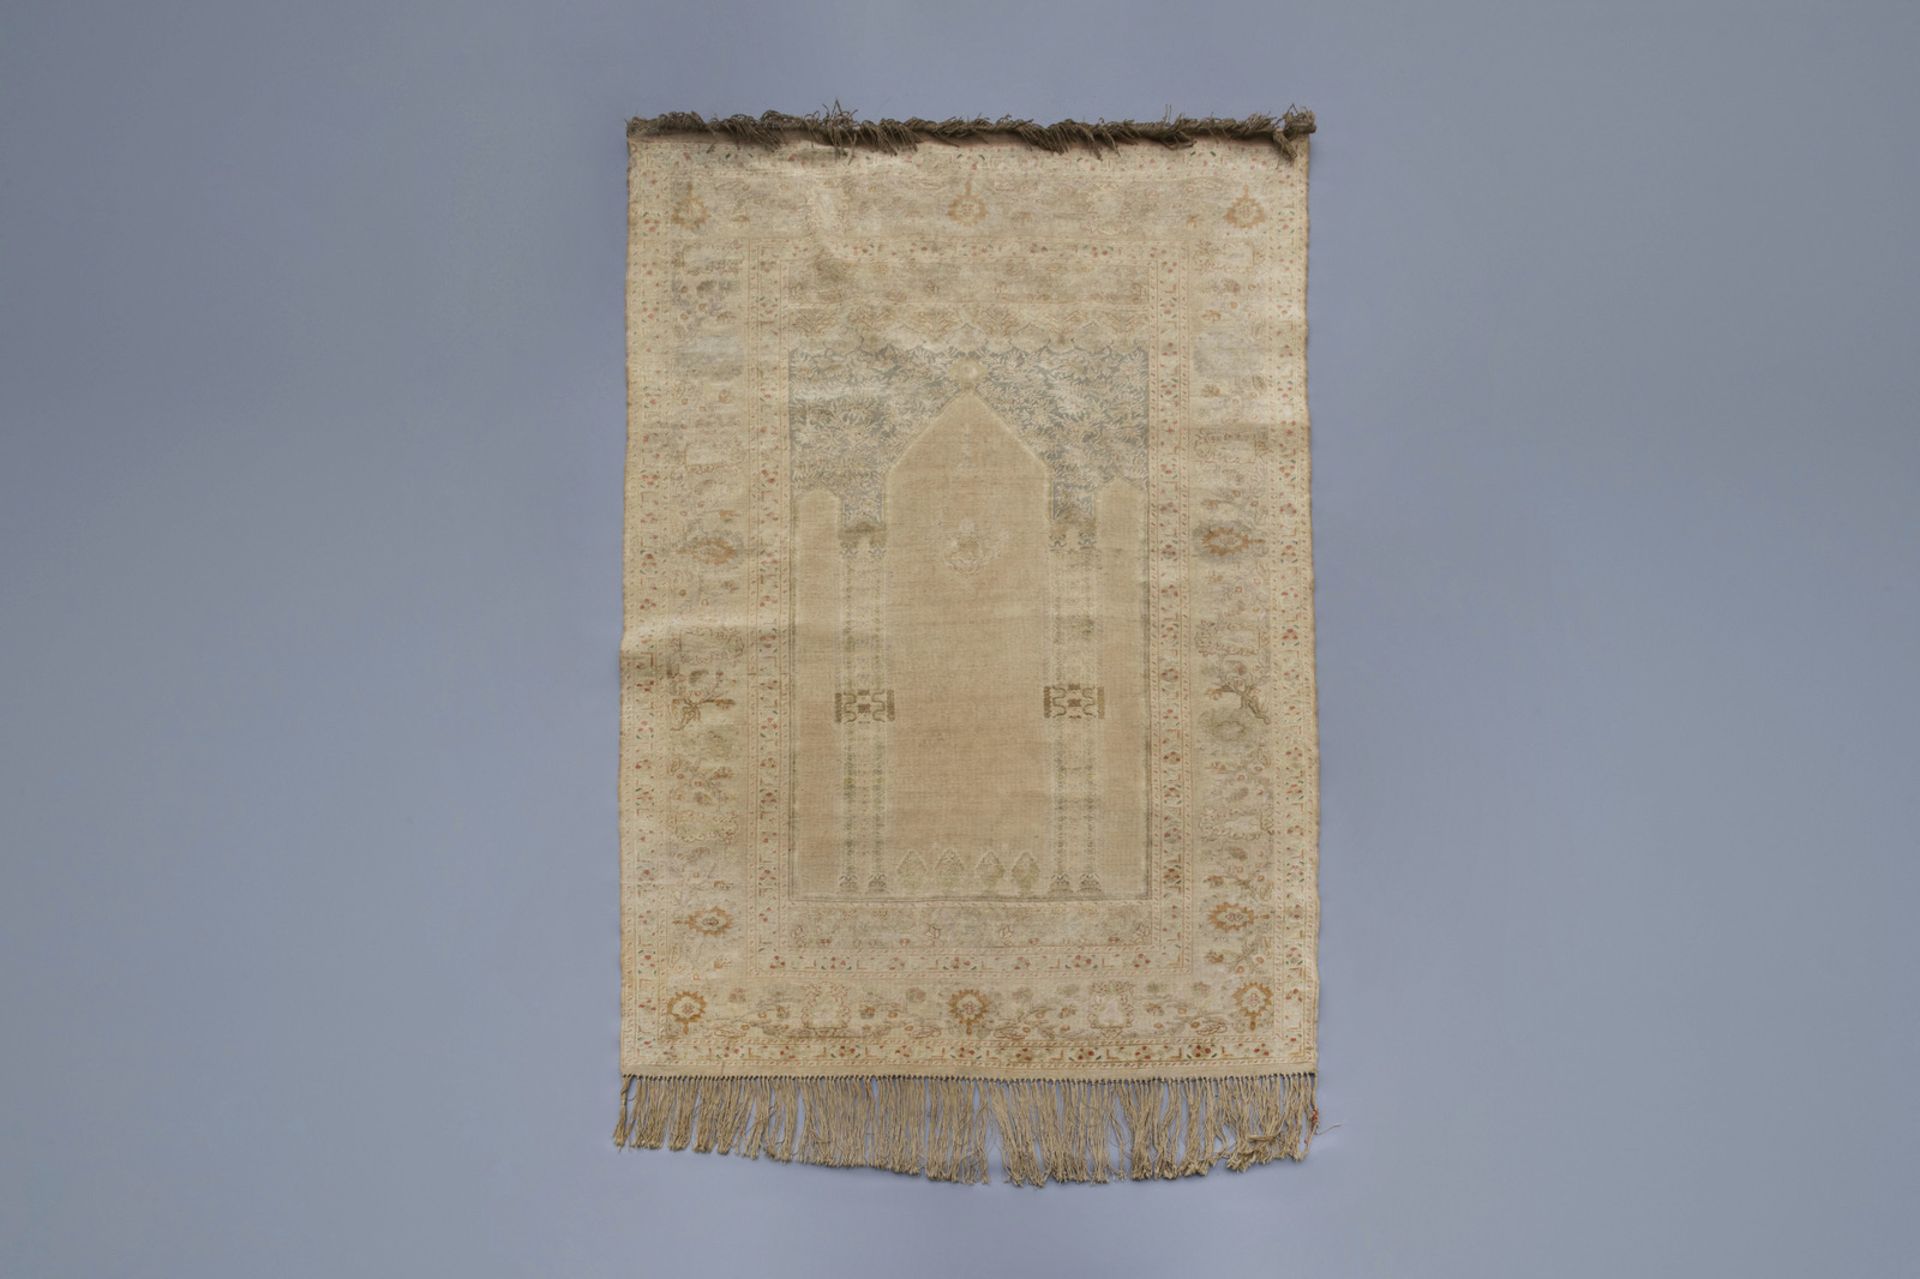 A very fine knotted Turkish prayer rug with different designs, silk on cotton, mid 19th C.